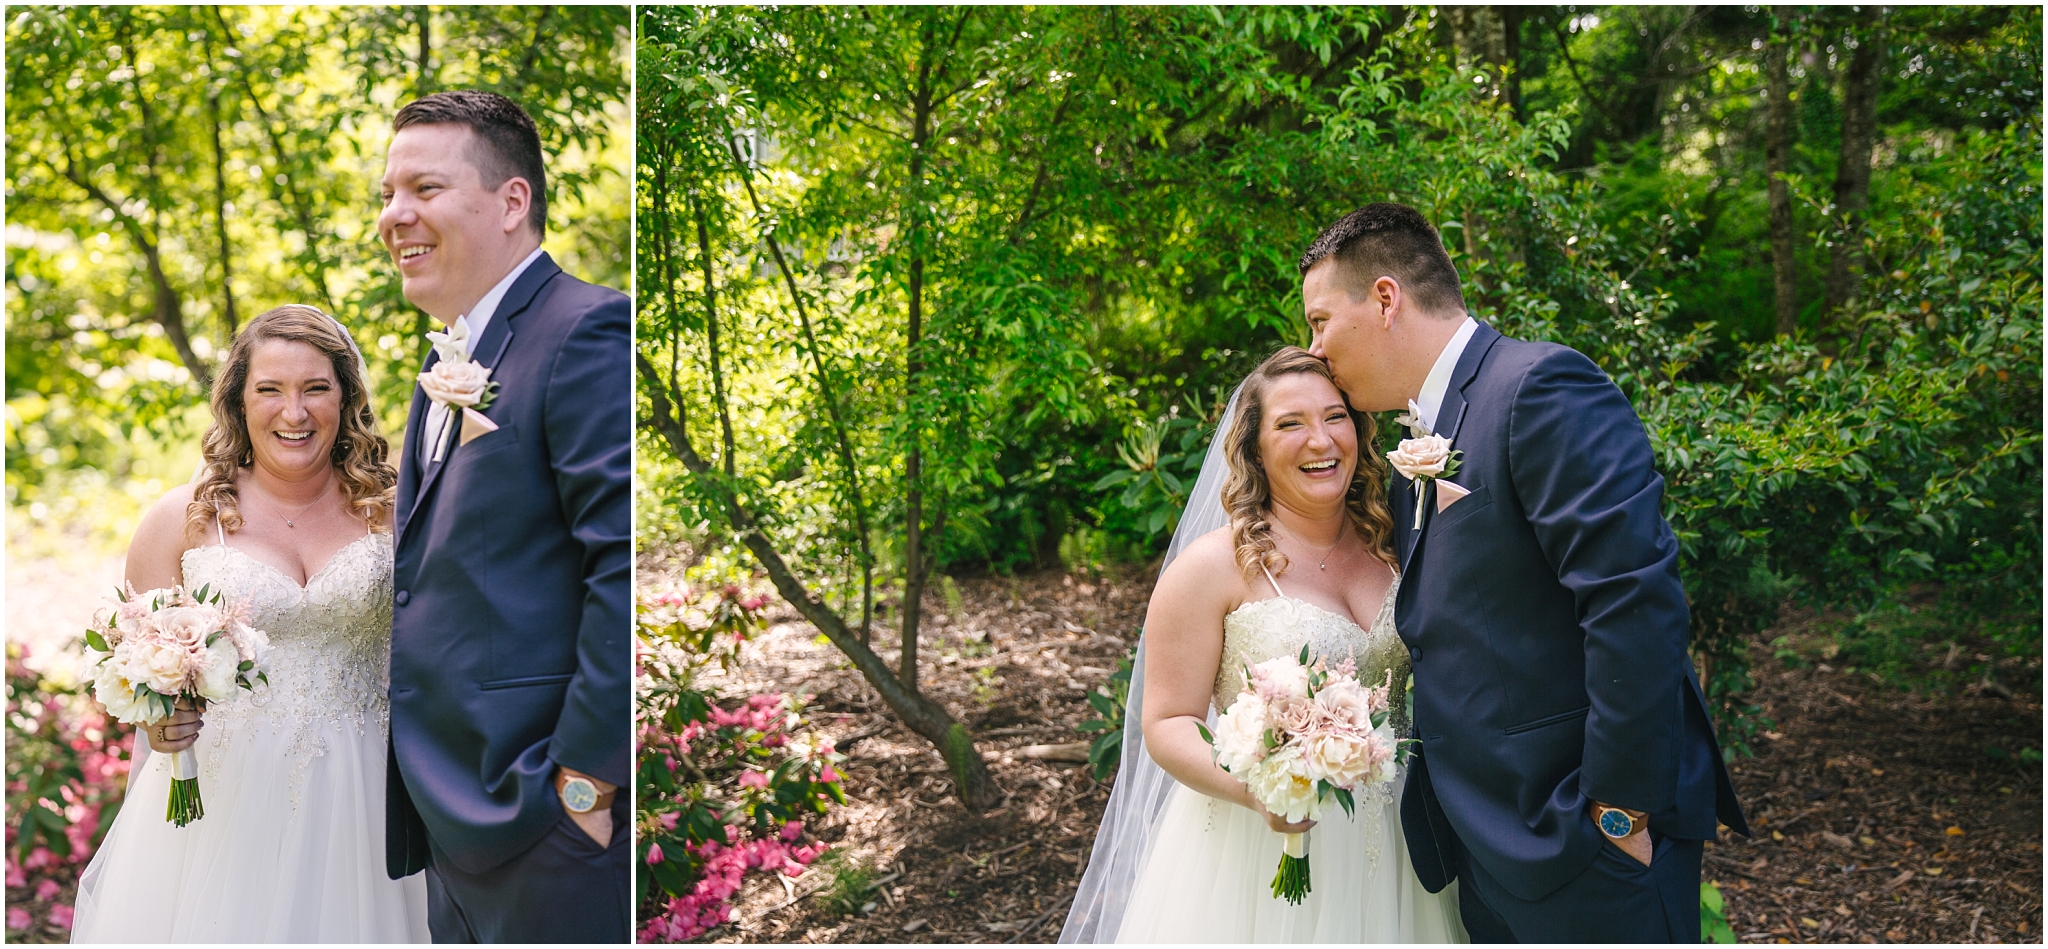 Bride and groom portraits under the trees in Issaquah Washington